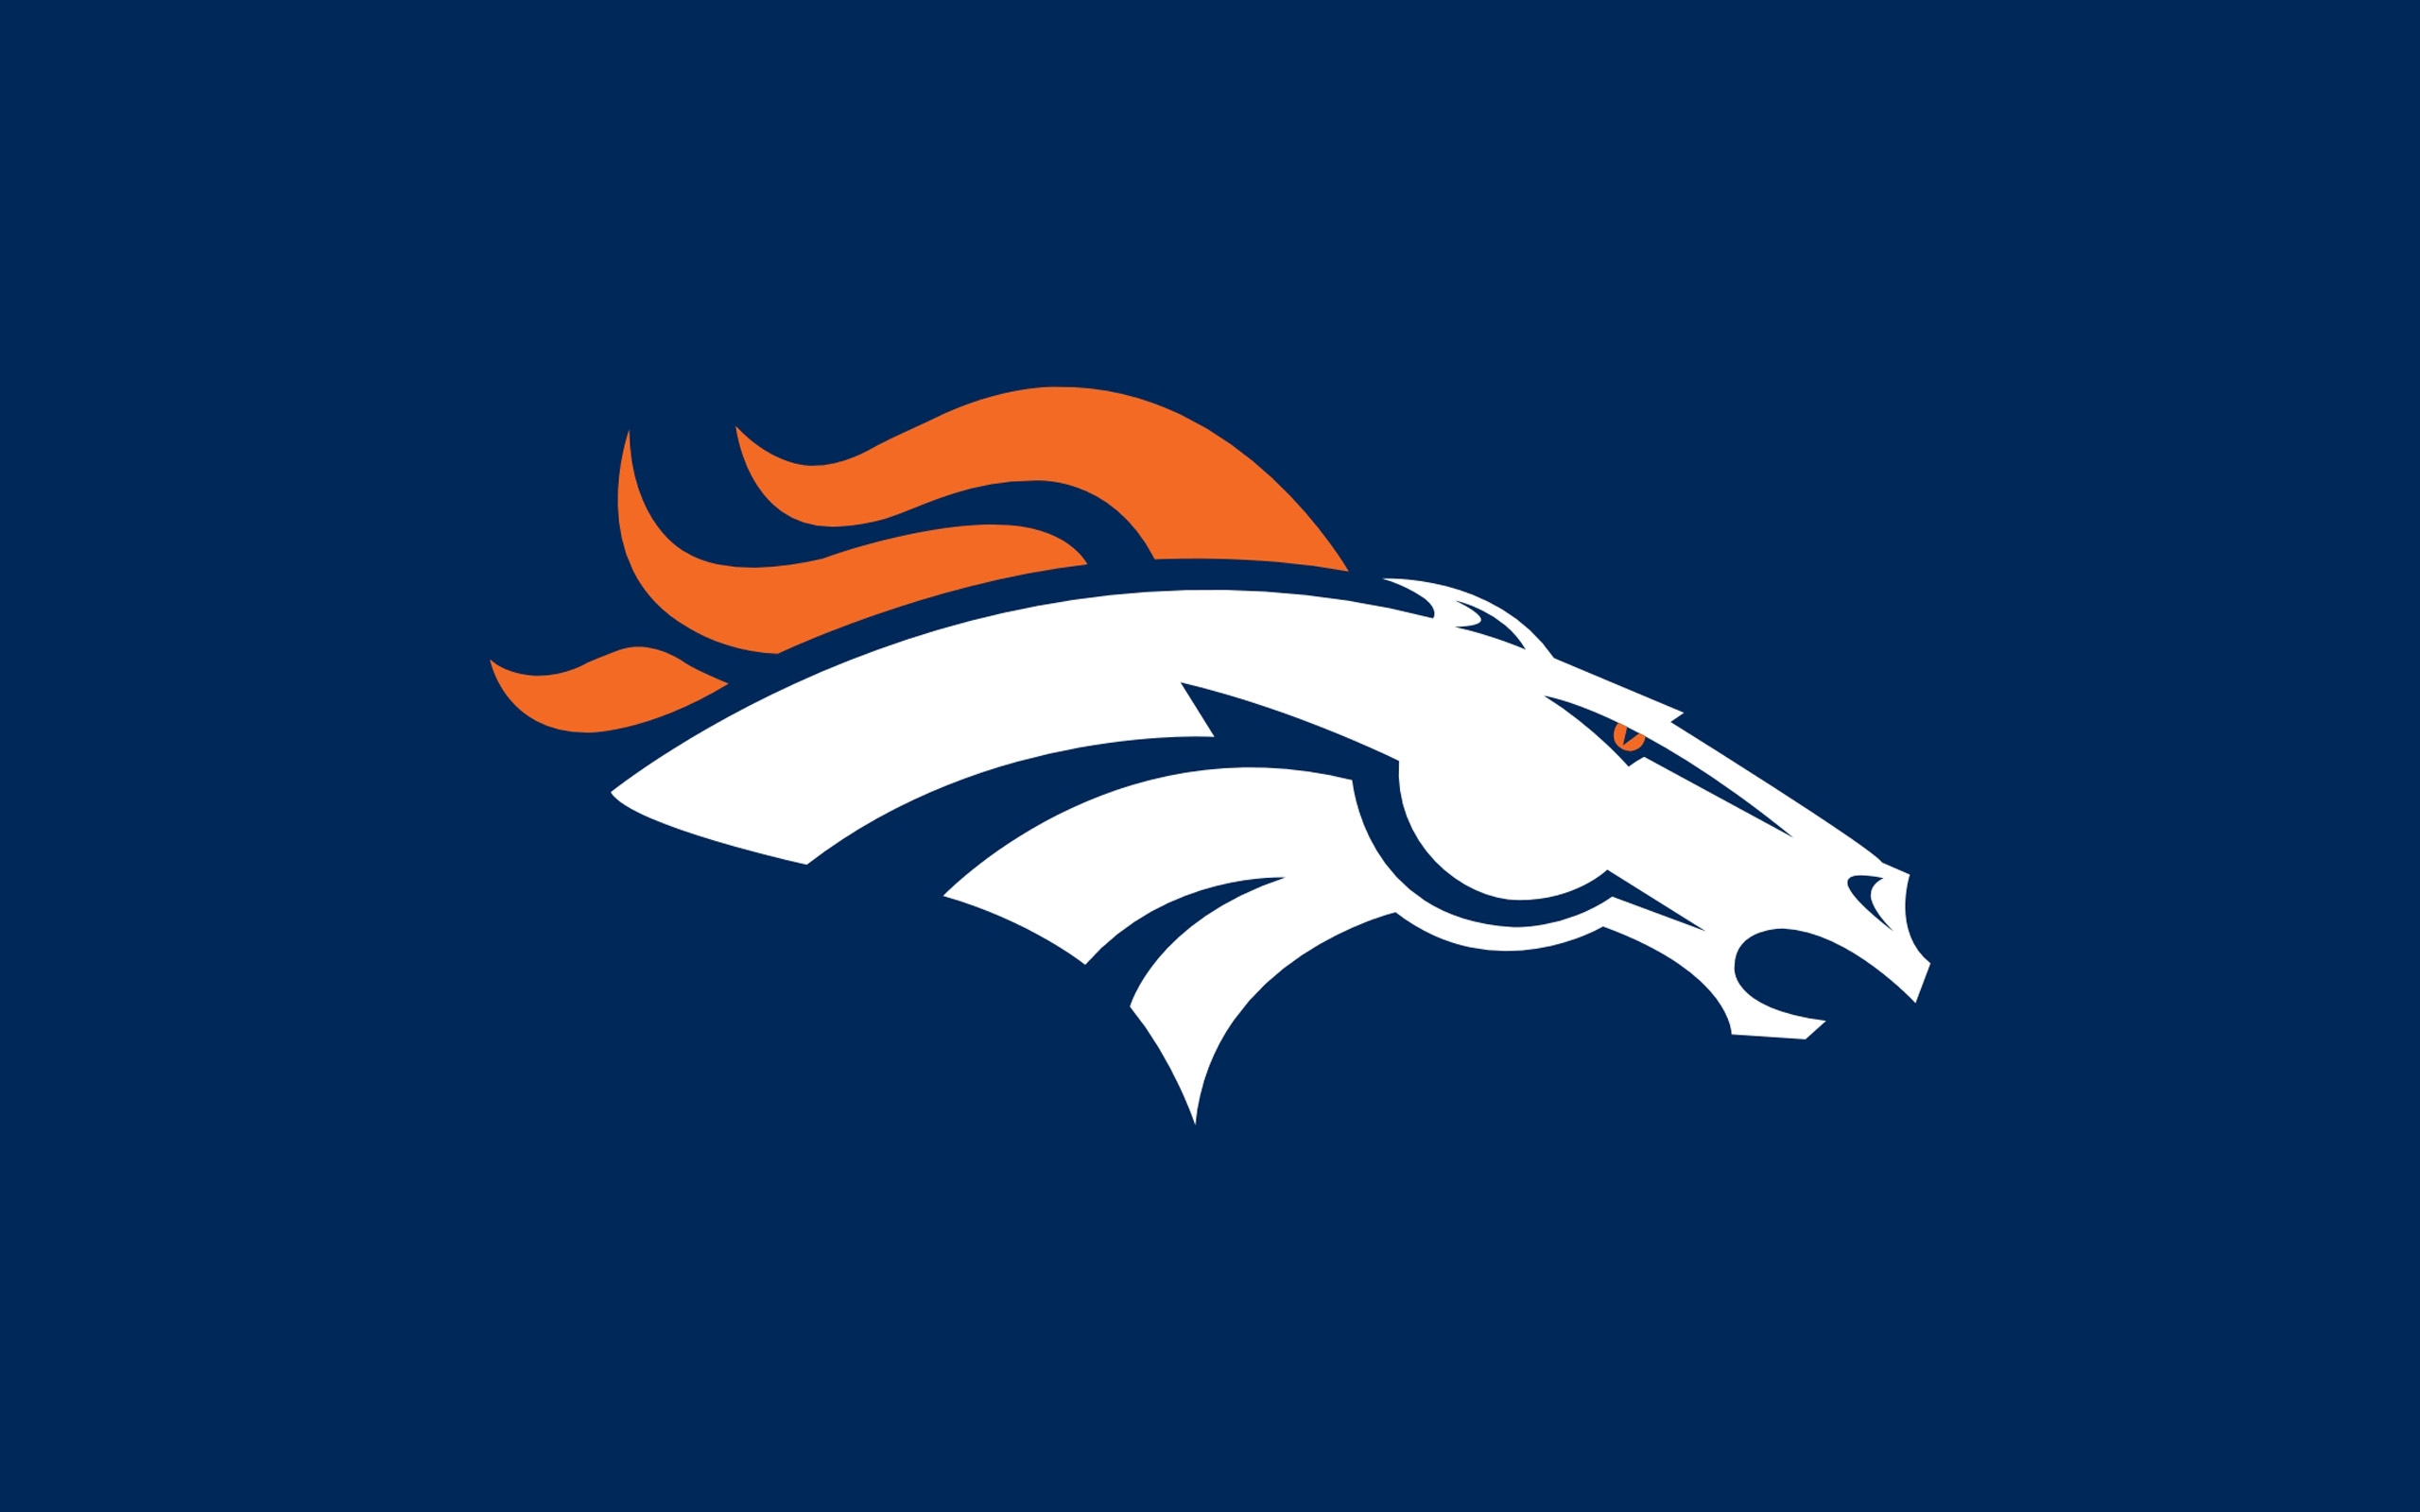 Denver Broncos were forced into going back to Peyton Manning